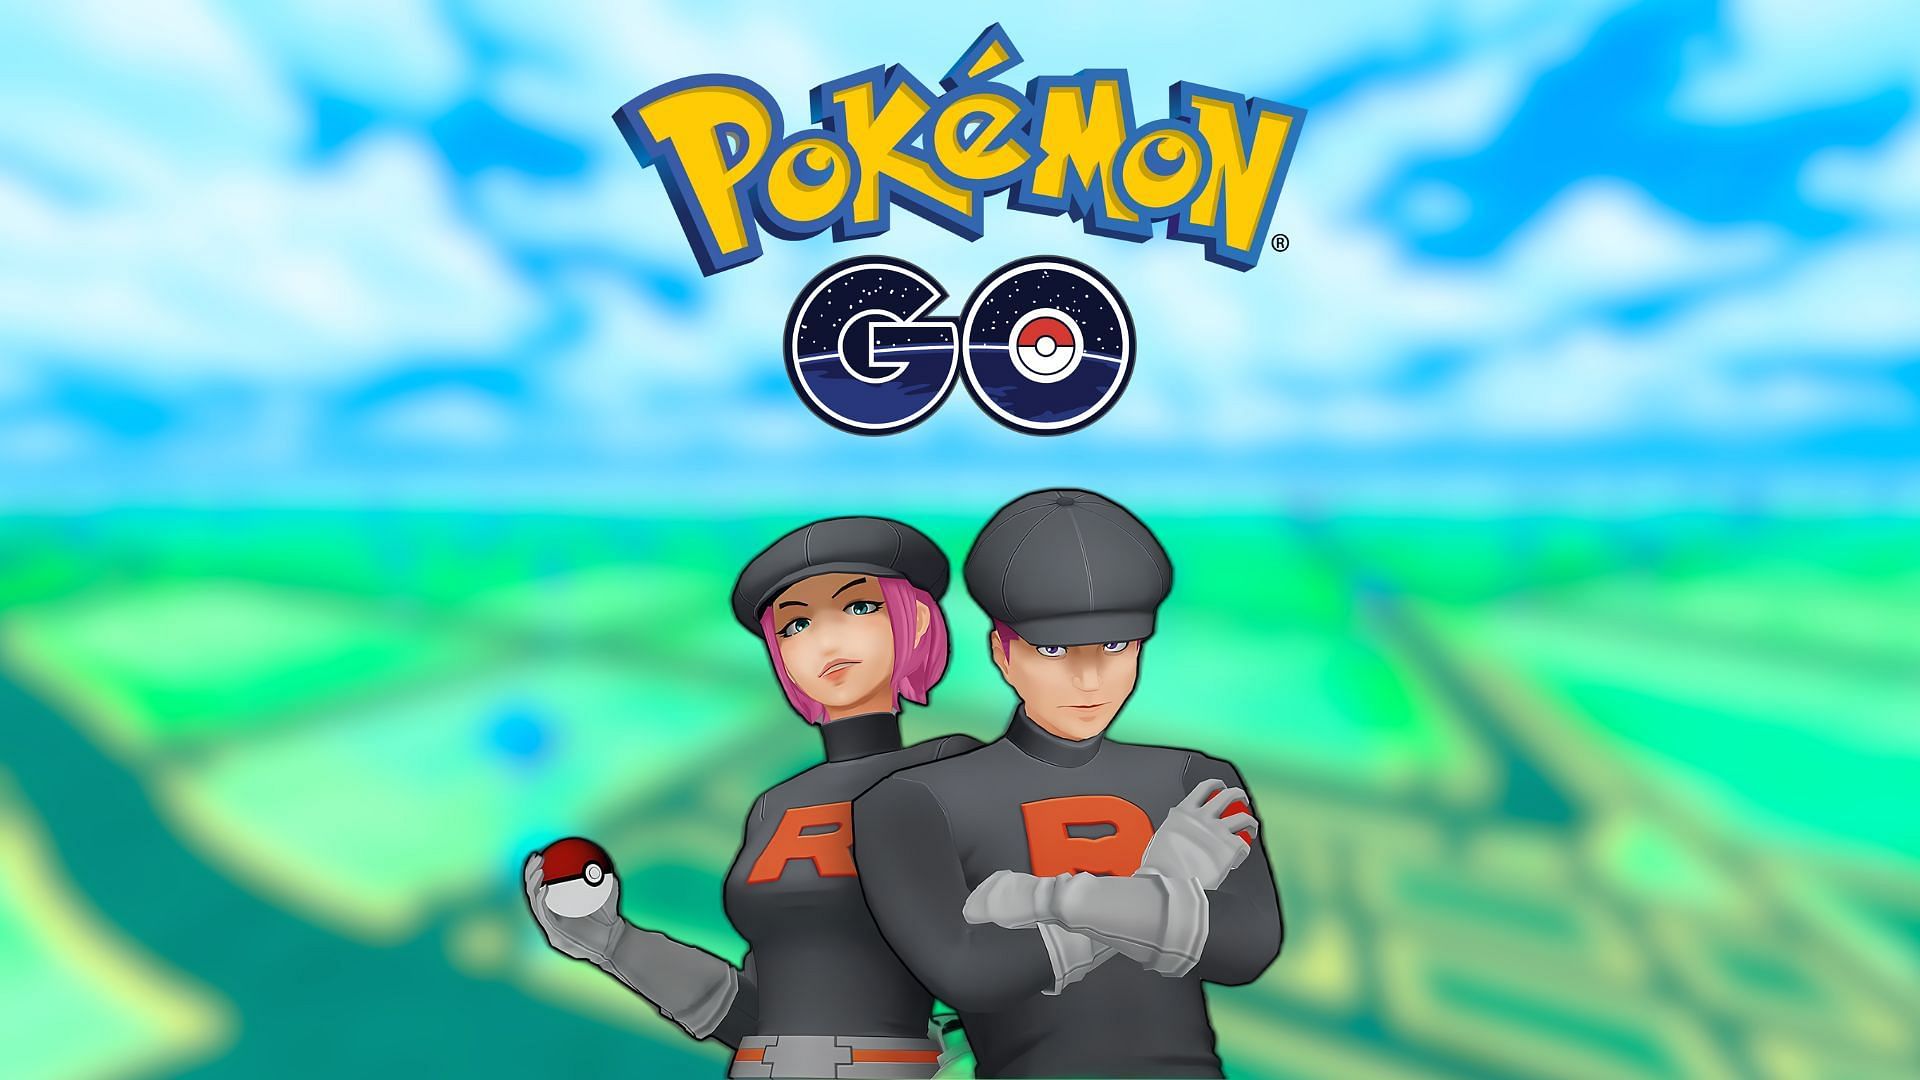 &quot;I&rsquo;ve never been more tempted to join Team Rocket&quot;: Pokemon GO player on latest avatar update and its effects